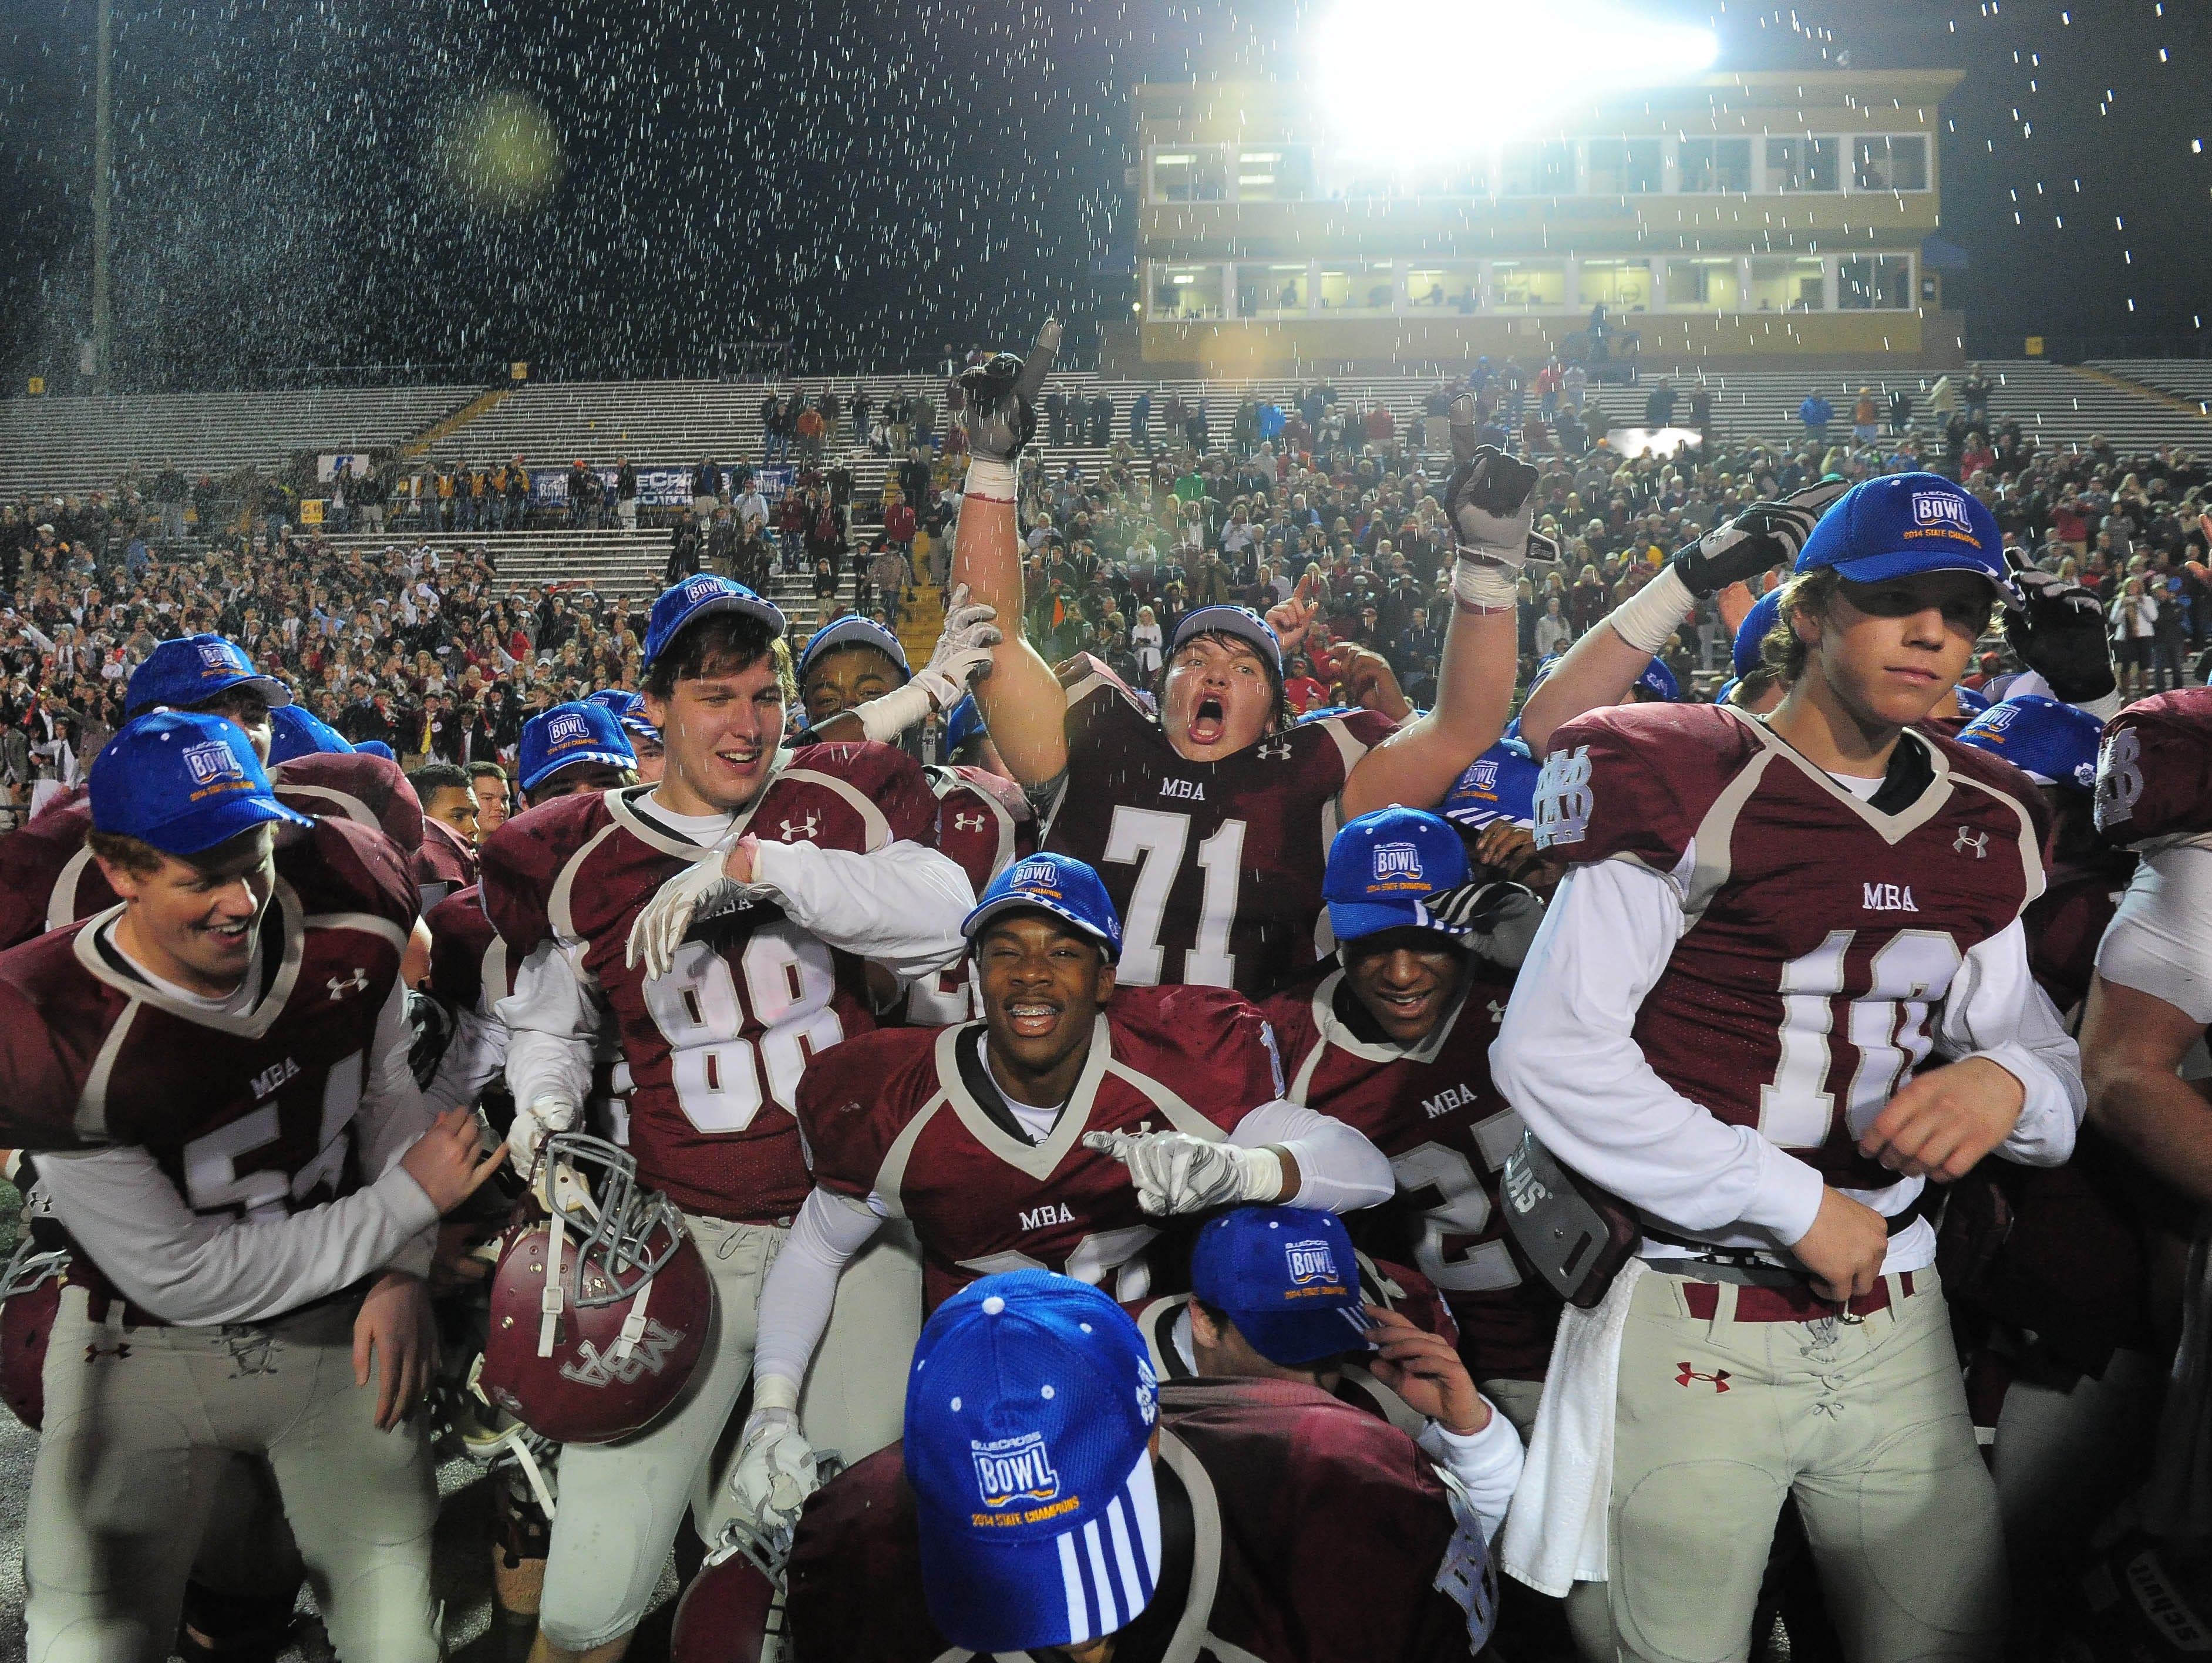 Montgomery Bell Academy players celebrate their 10-7 win over Ensworth for the Division II-AA state championship last December..